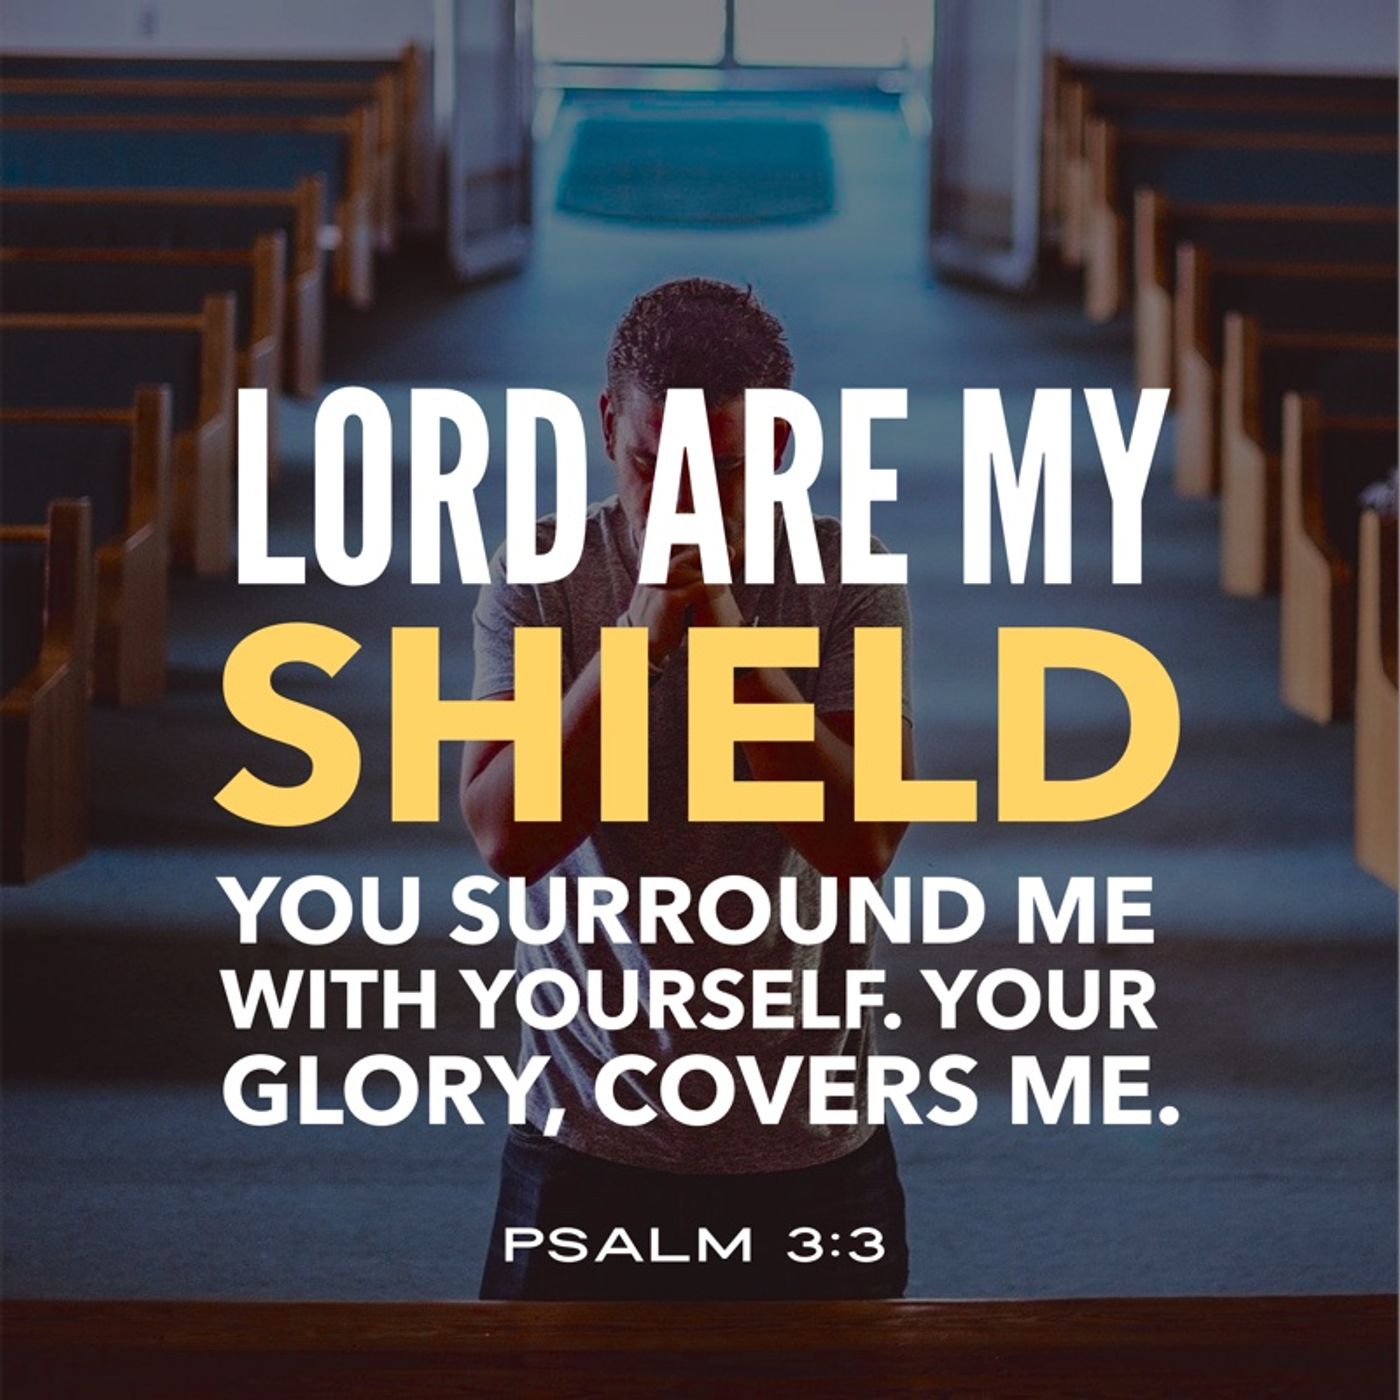 Prayer to Know God’s Shield of Love Surrounds you and Protects You Always